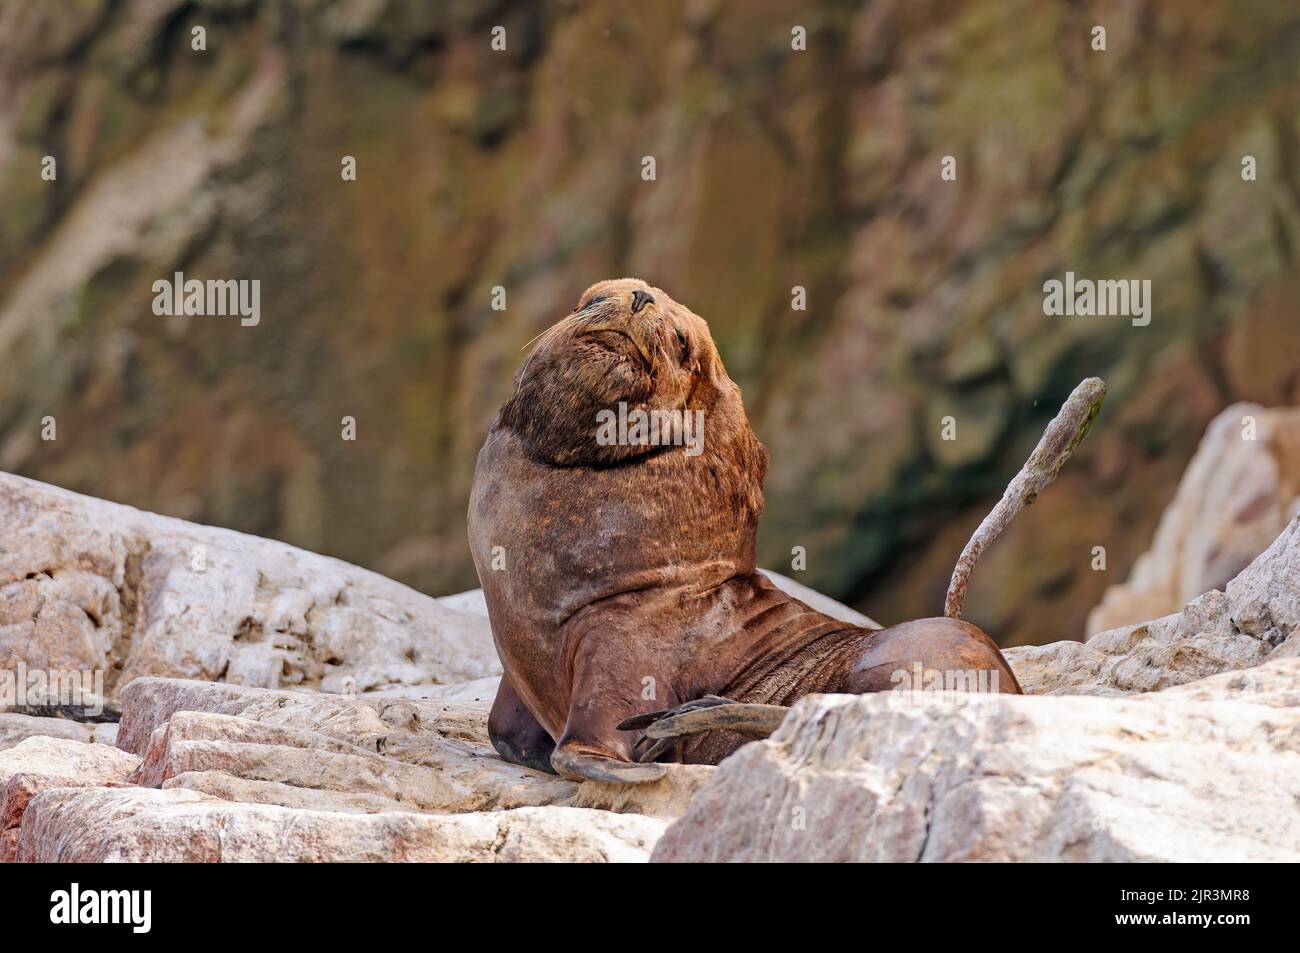 A Large Male South American Sea Lion on a Remote Island on the Ballestas Islands in Peru Stock Photo